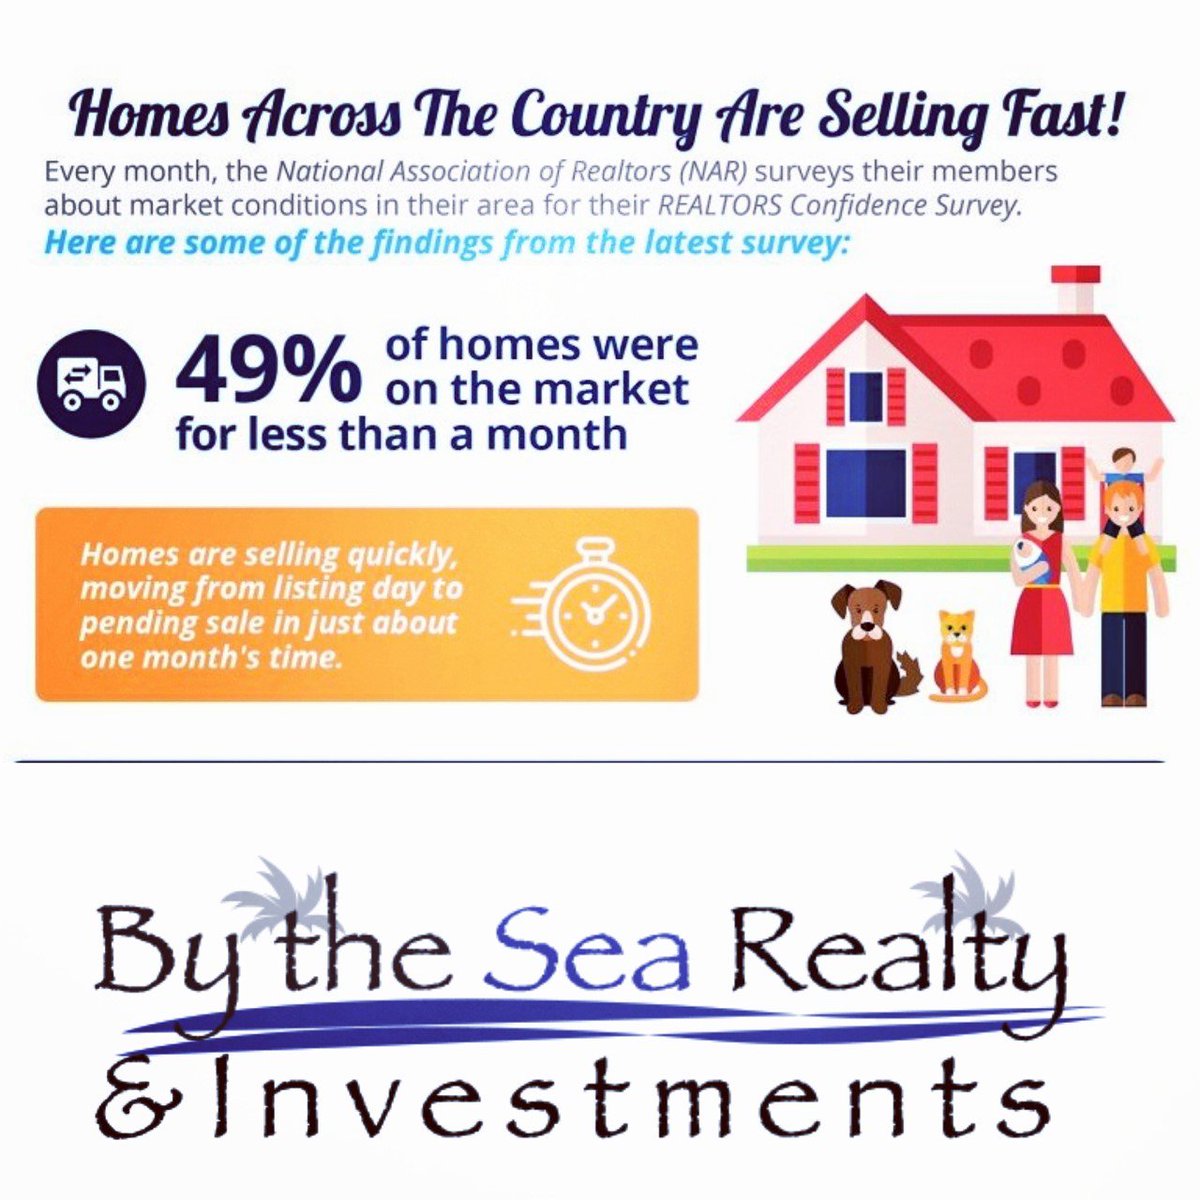 #Homes across the country are selling quickly, in an average of just 31 days!  49% of homes sold in less than a month! #firsttimehomebuyer #downpaymentassistance #millenials #realestate #buyers #sellers #puntagordarealestate #southfloridarealestate #miamirealestate #miamihomes